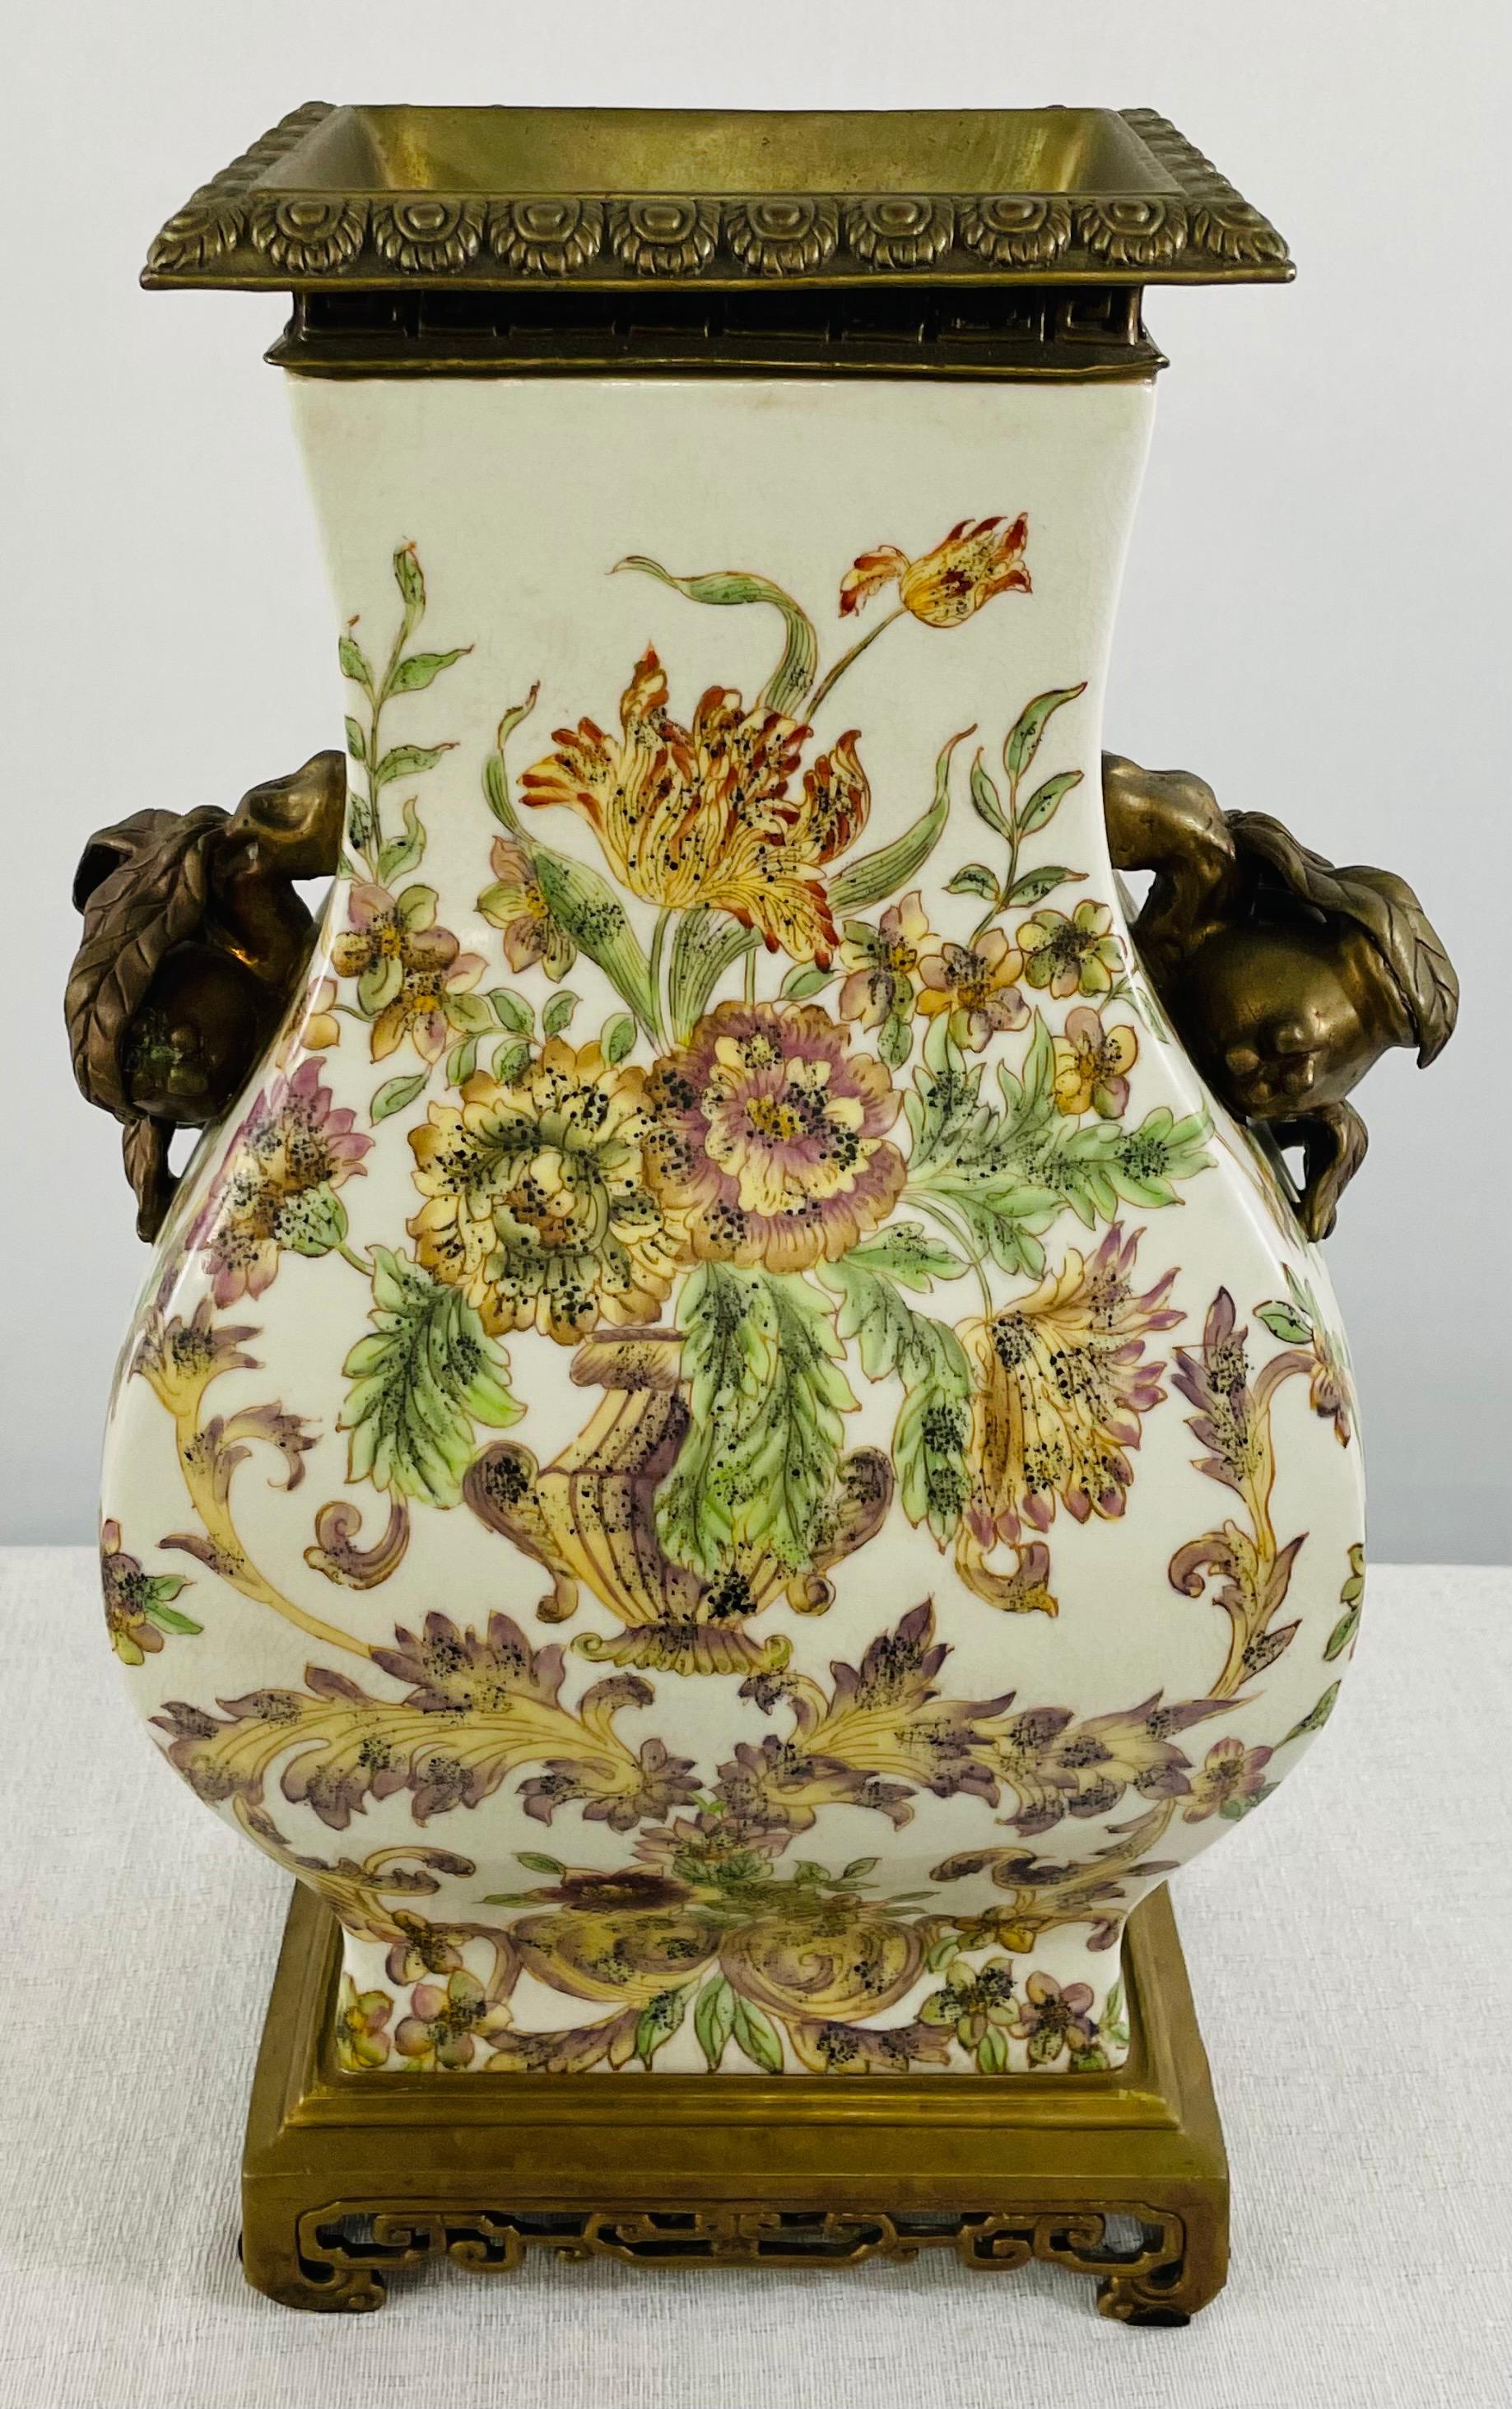 A 20th Century Castilian porcelain vase featuring exquisite floral design in Green, yellow and purple tone on a white background. The elegant vase is embellished with bronze inlay around the mouth of the vase and two bronze handles each in the form